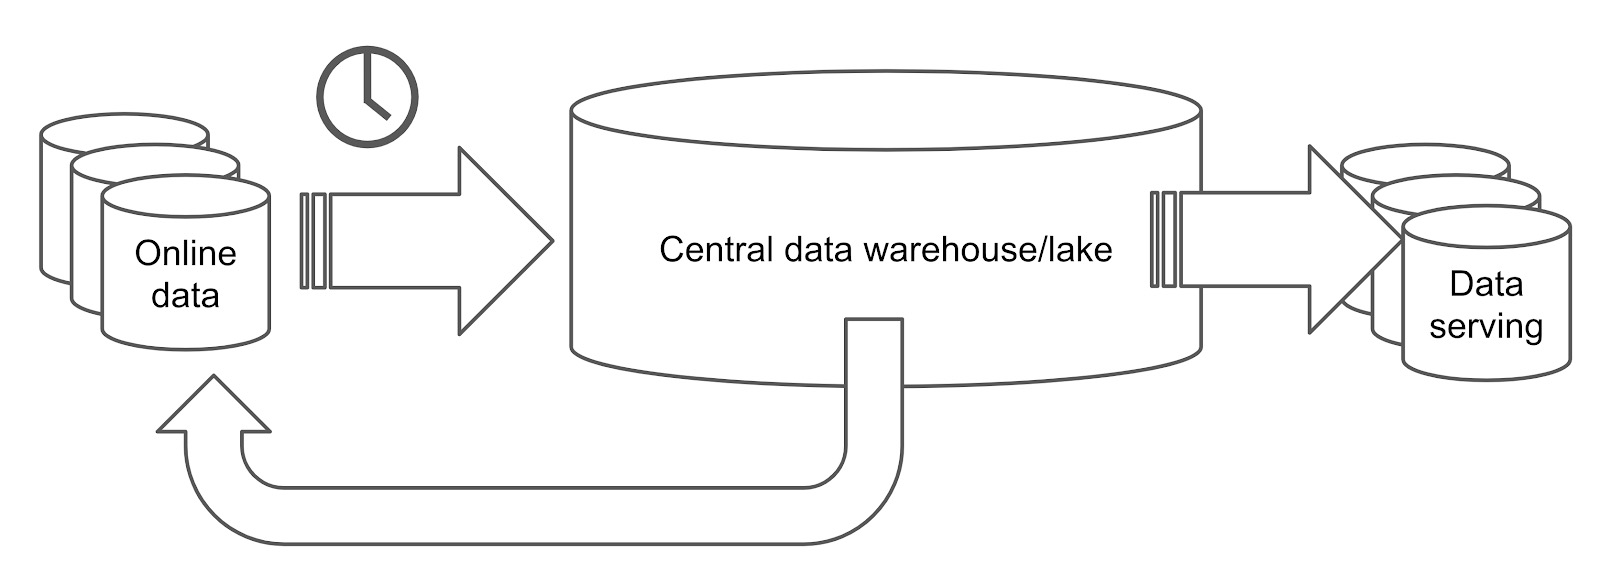 A traditional data platform with OLTP and OLAP